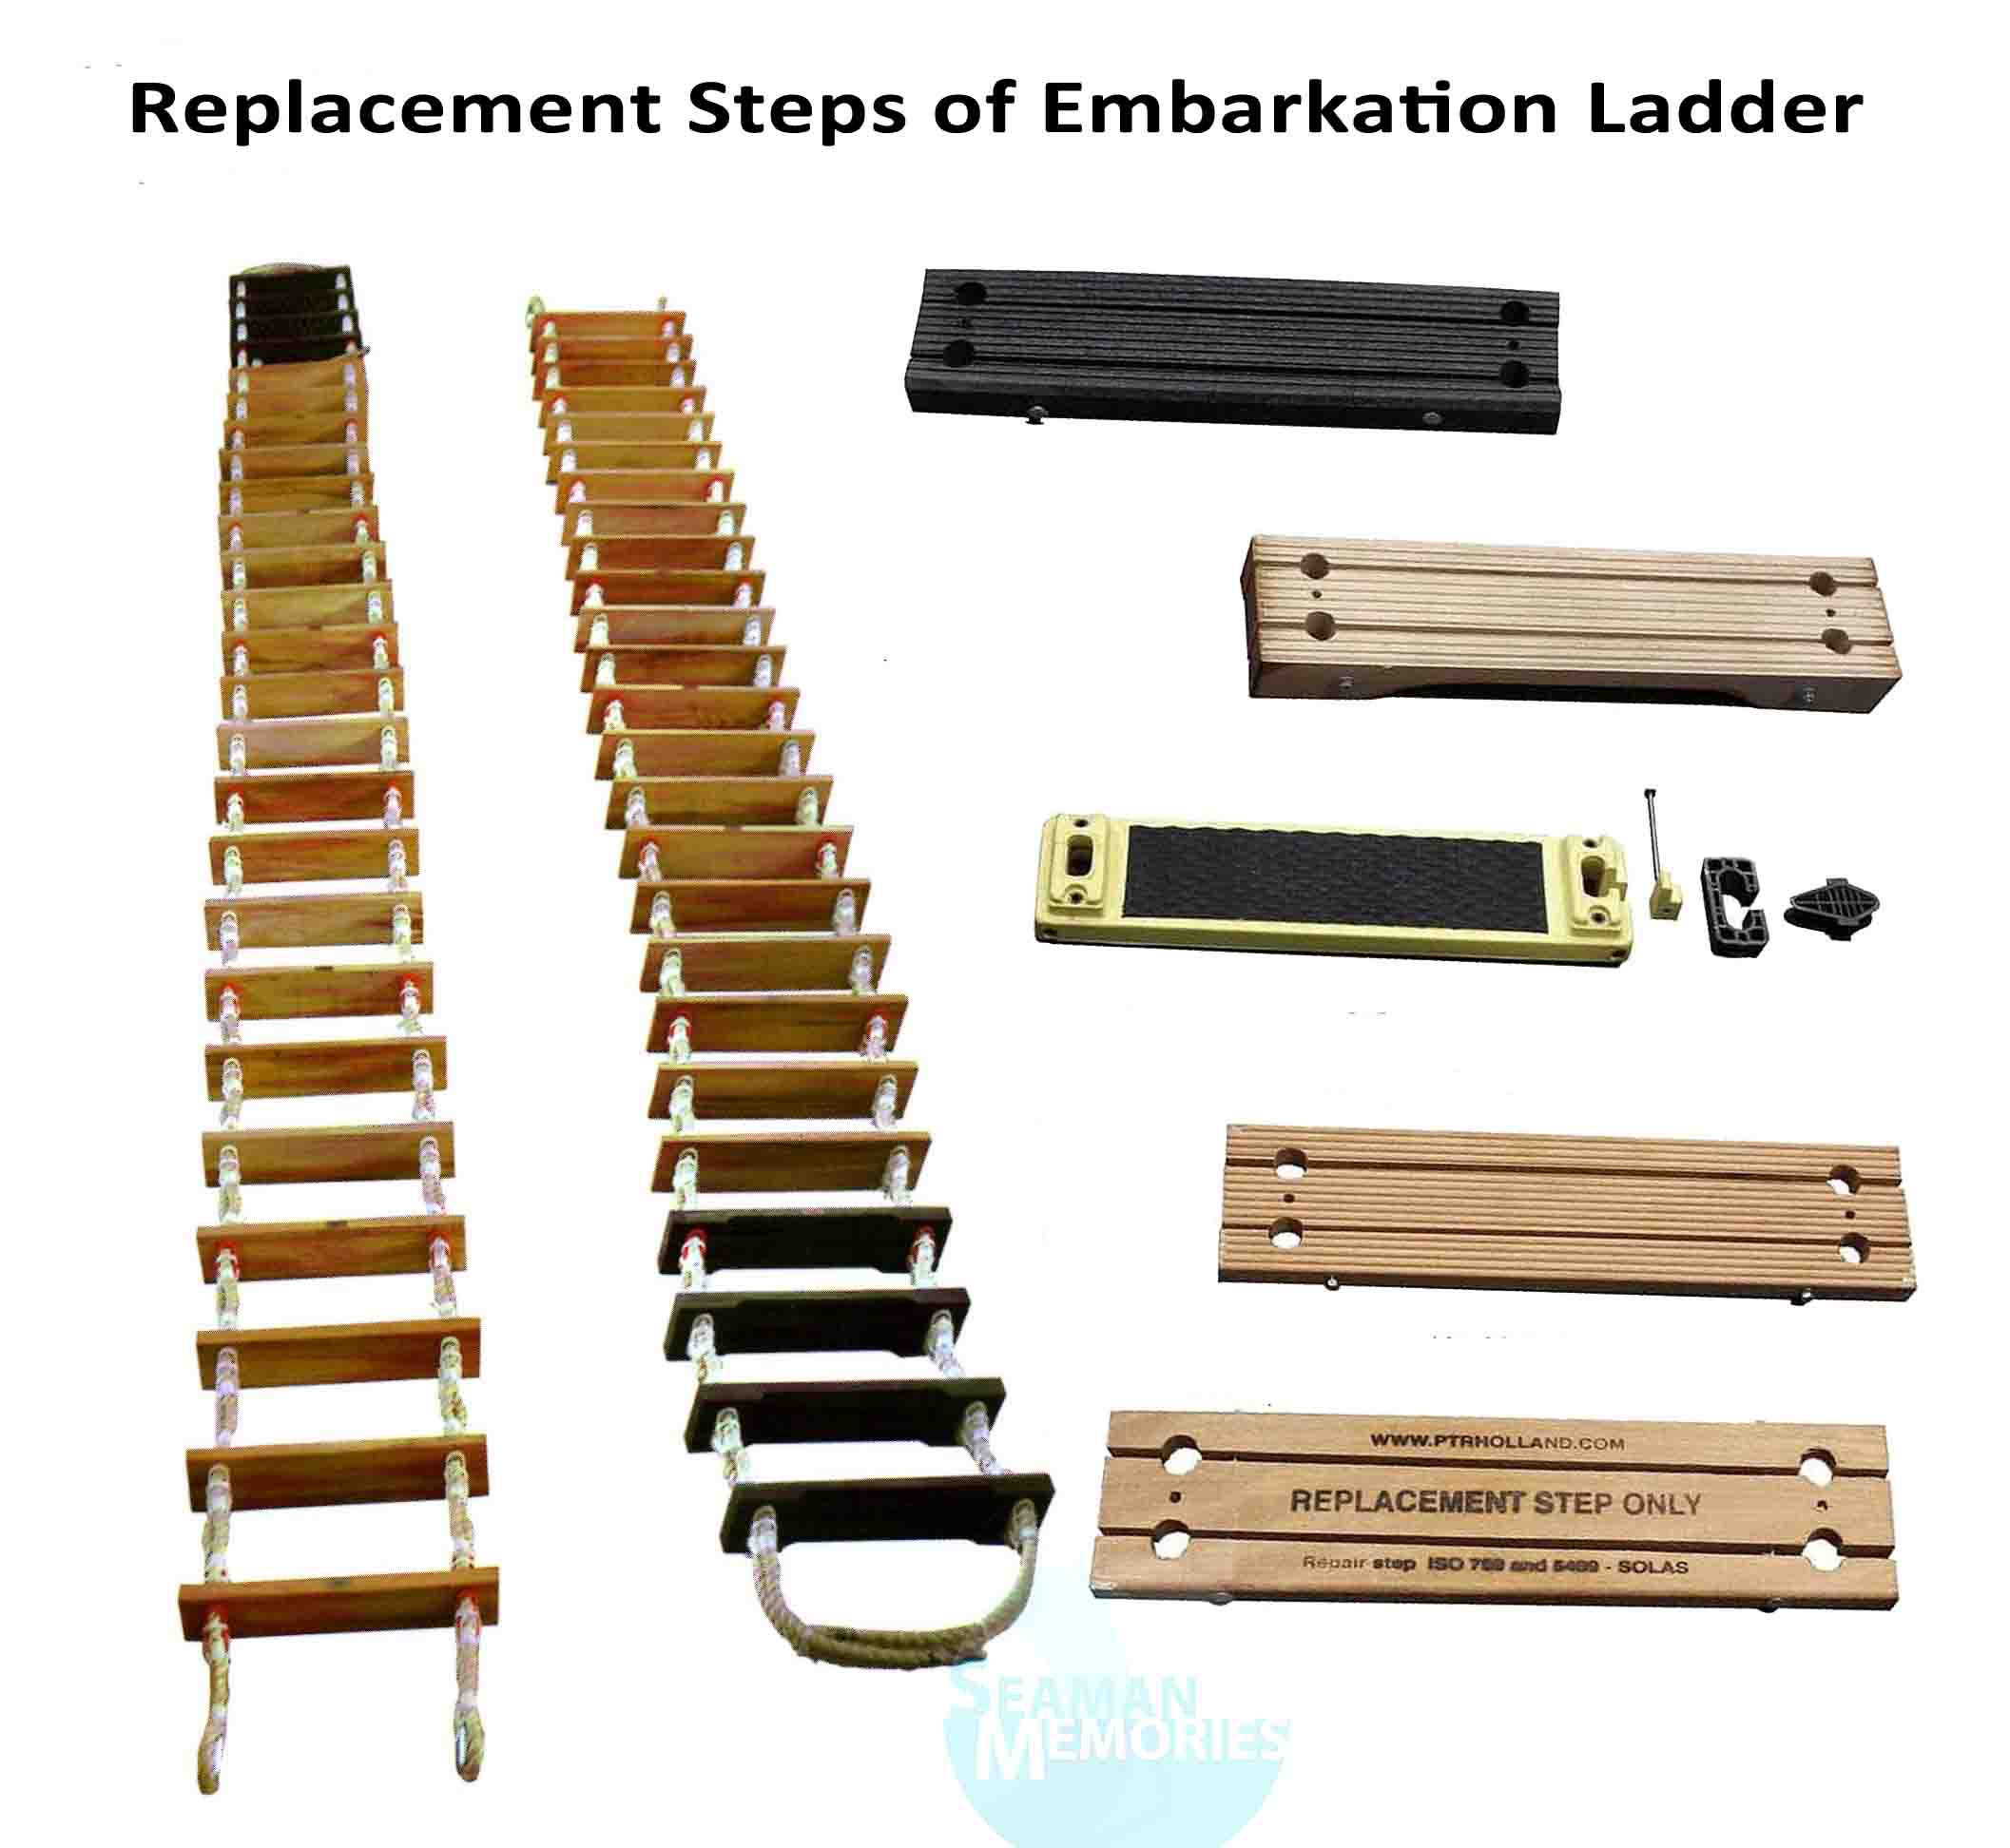 Replacement steps of embarkation ladder made of wood and rubber.